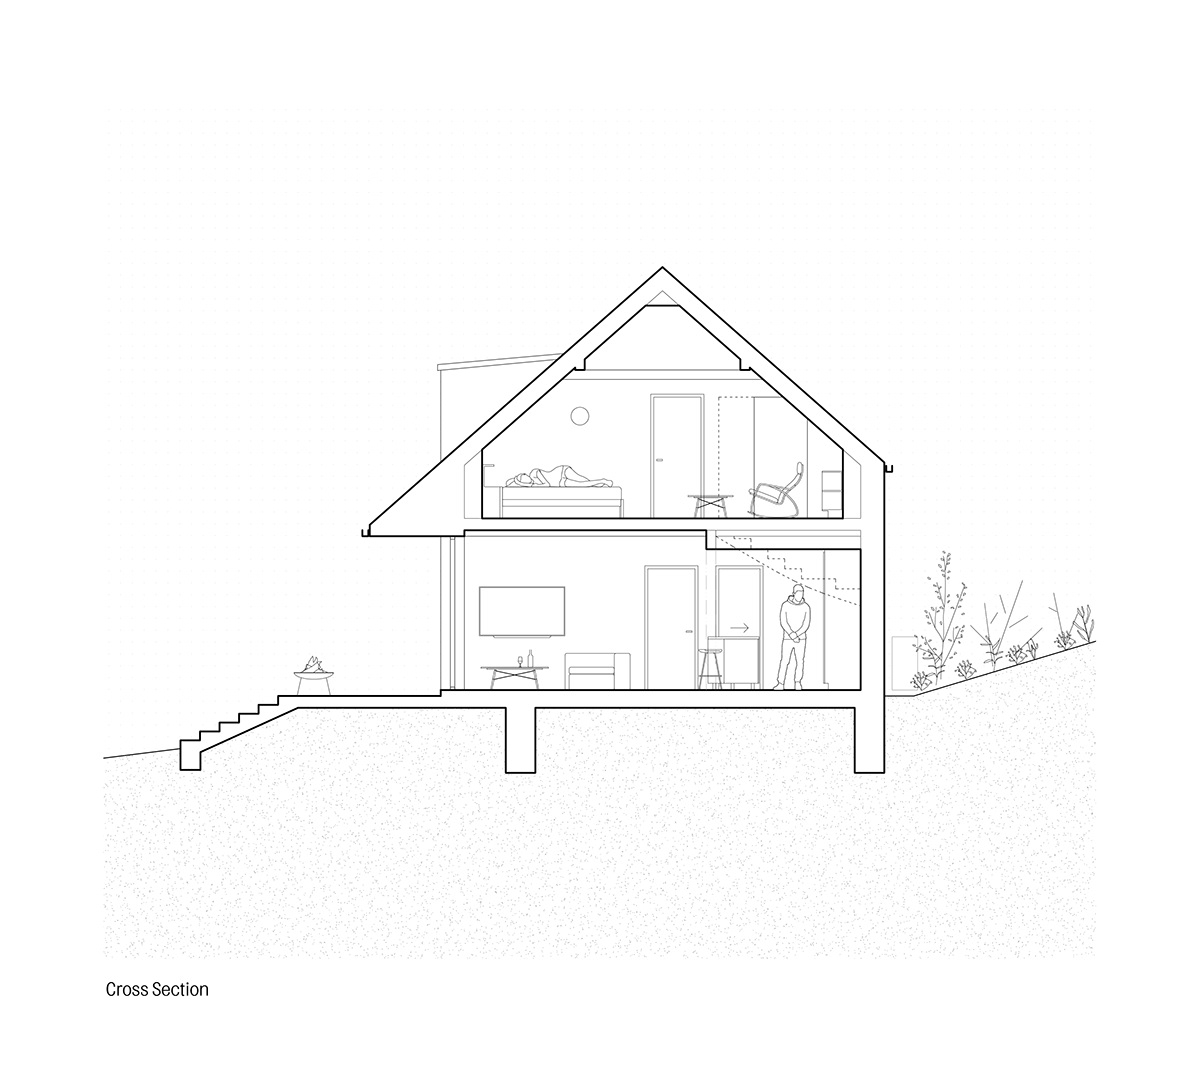 architecture family house garden house individual house minimalist nordic simple wood wooden facade